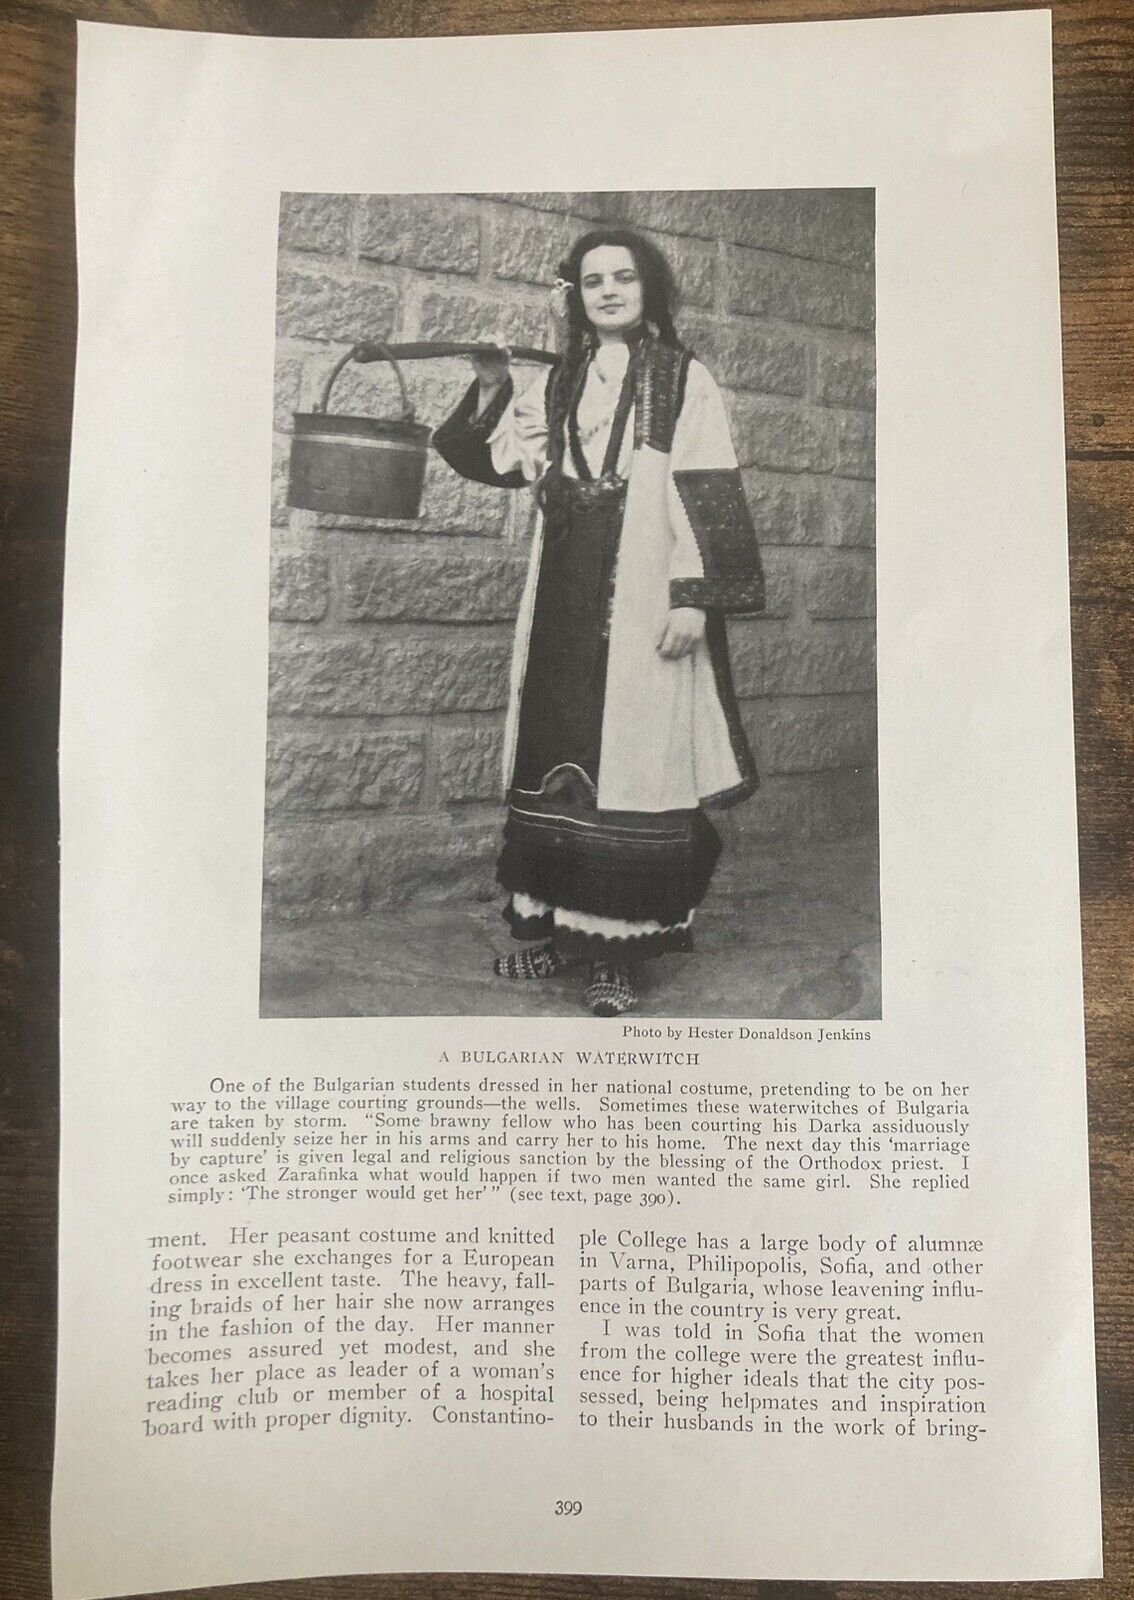 Book Clipping Photo Bulgarian Waterwitch 1915 